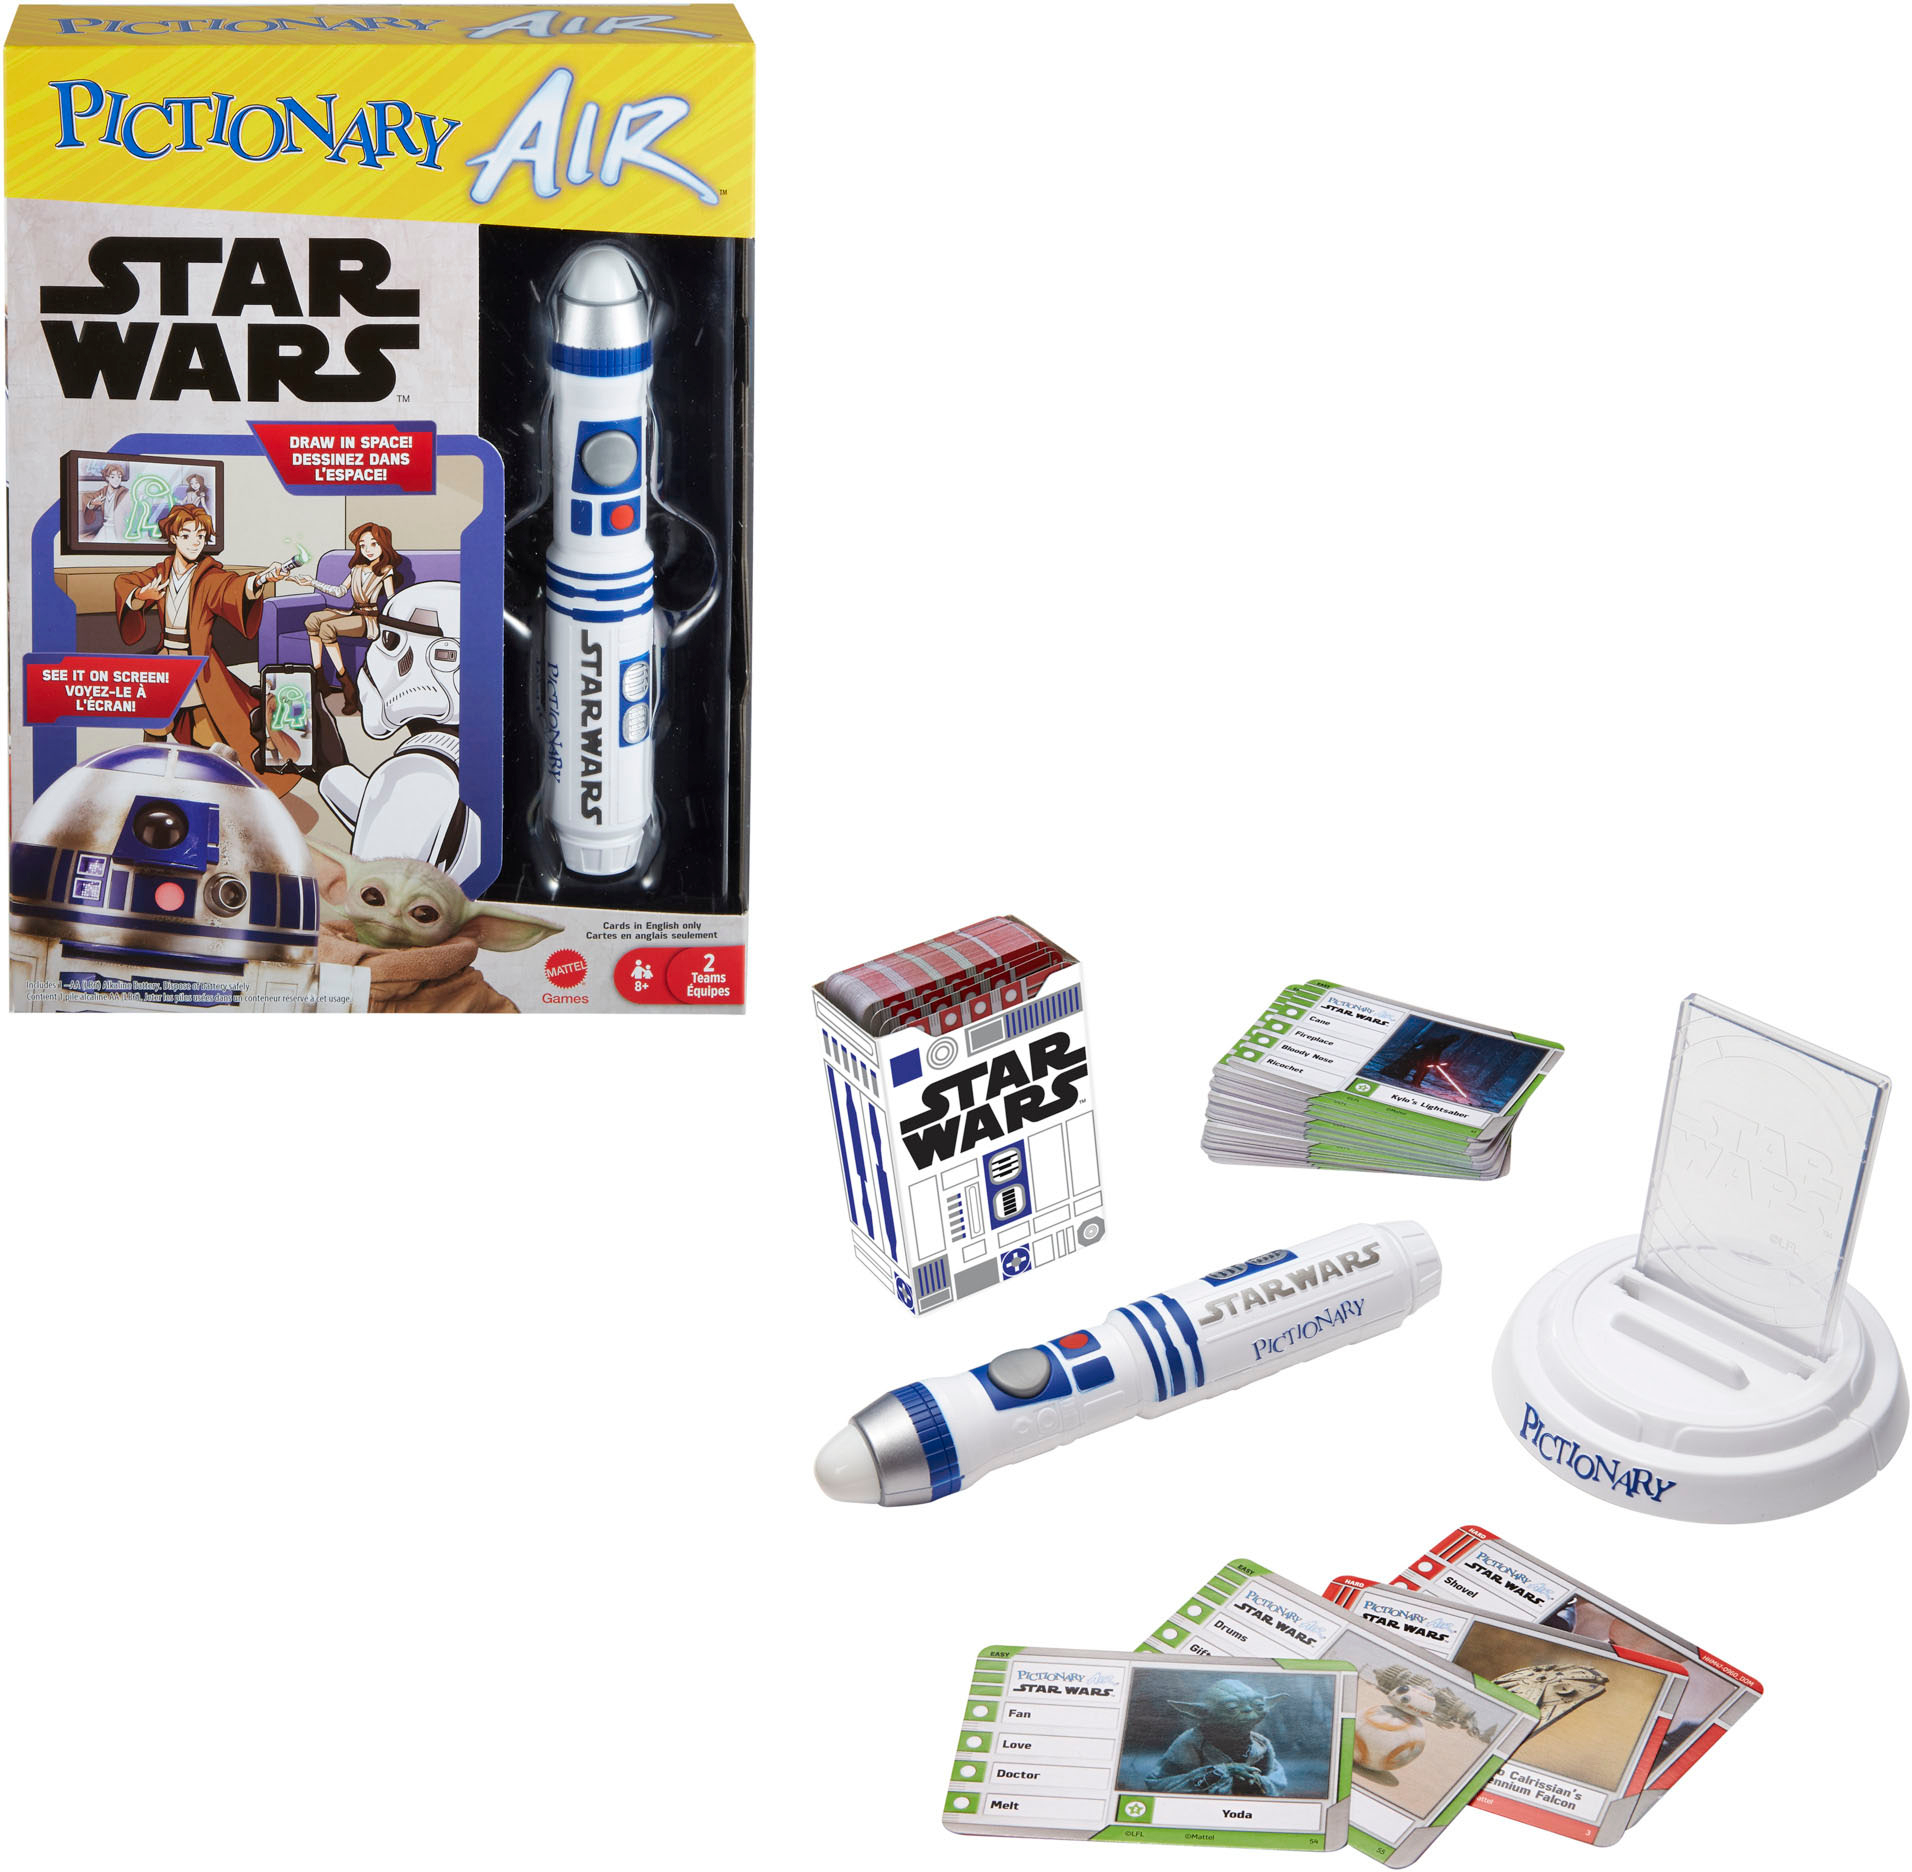 Star Wars Pictionary Air HHM47 - Best Buy